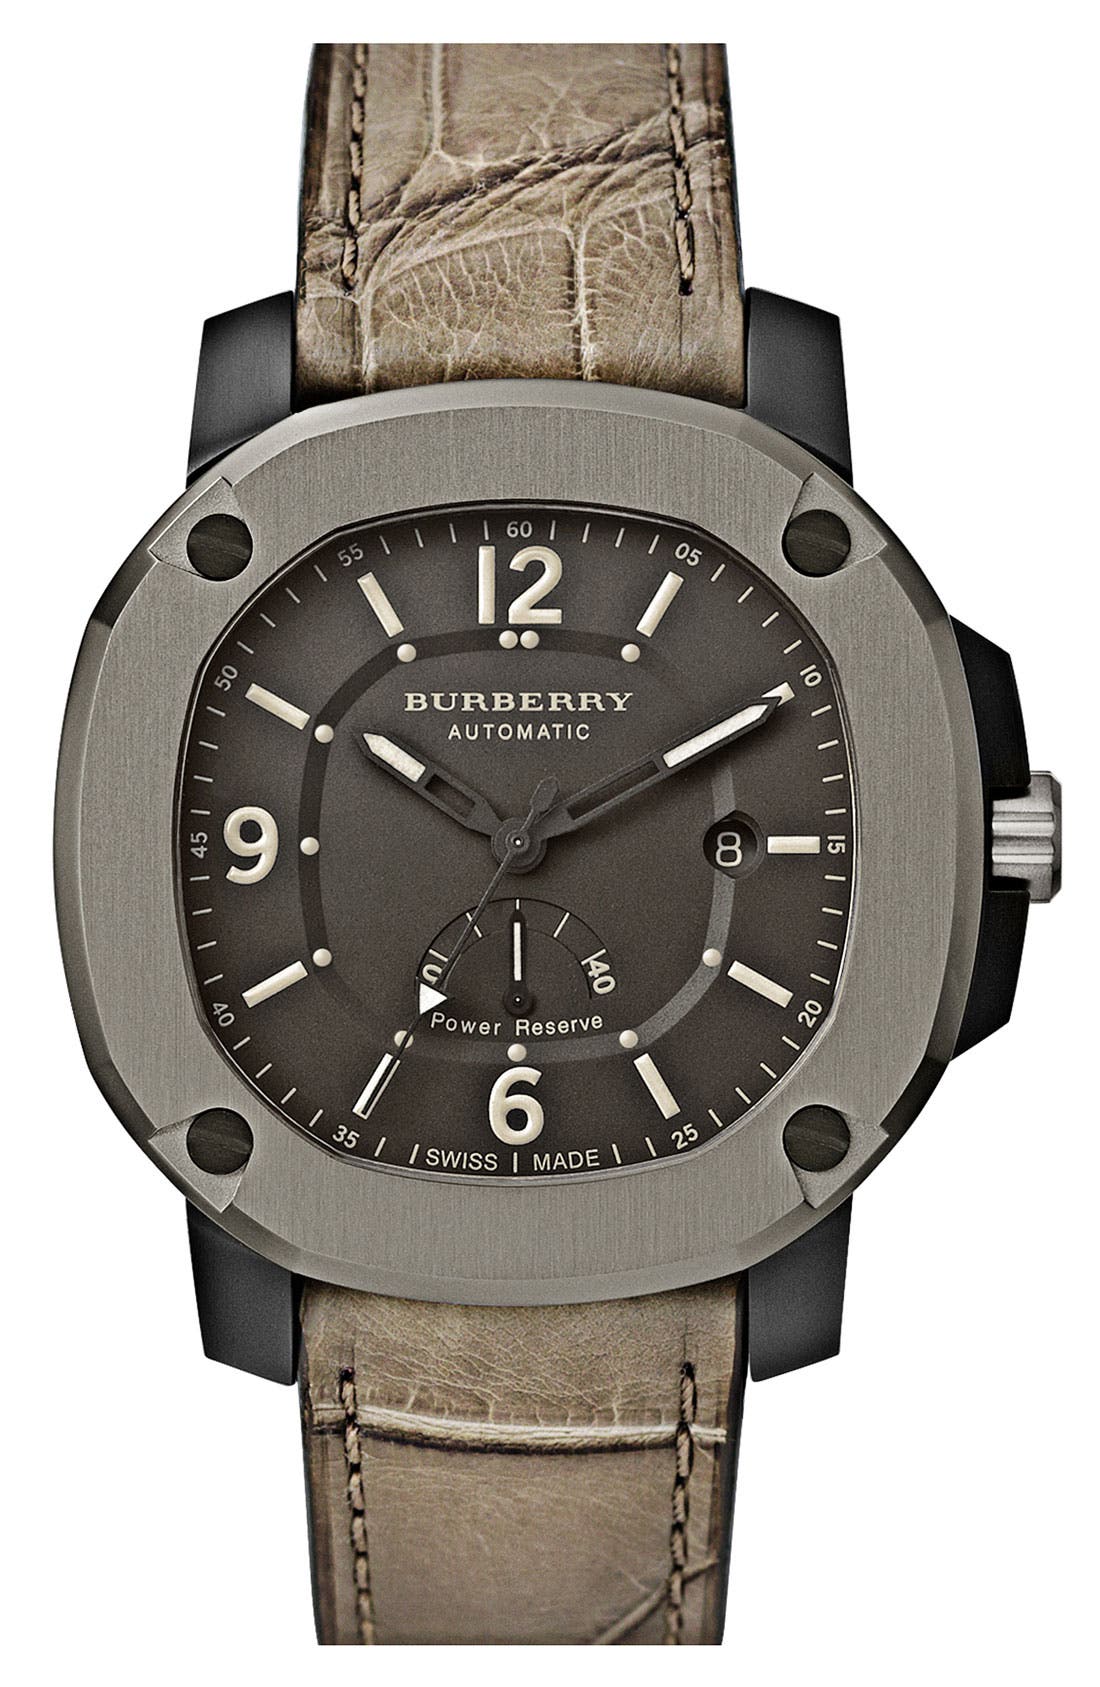 burberry automatic watch